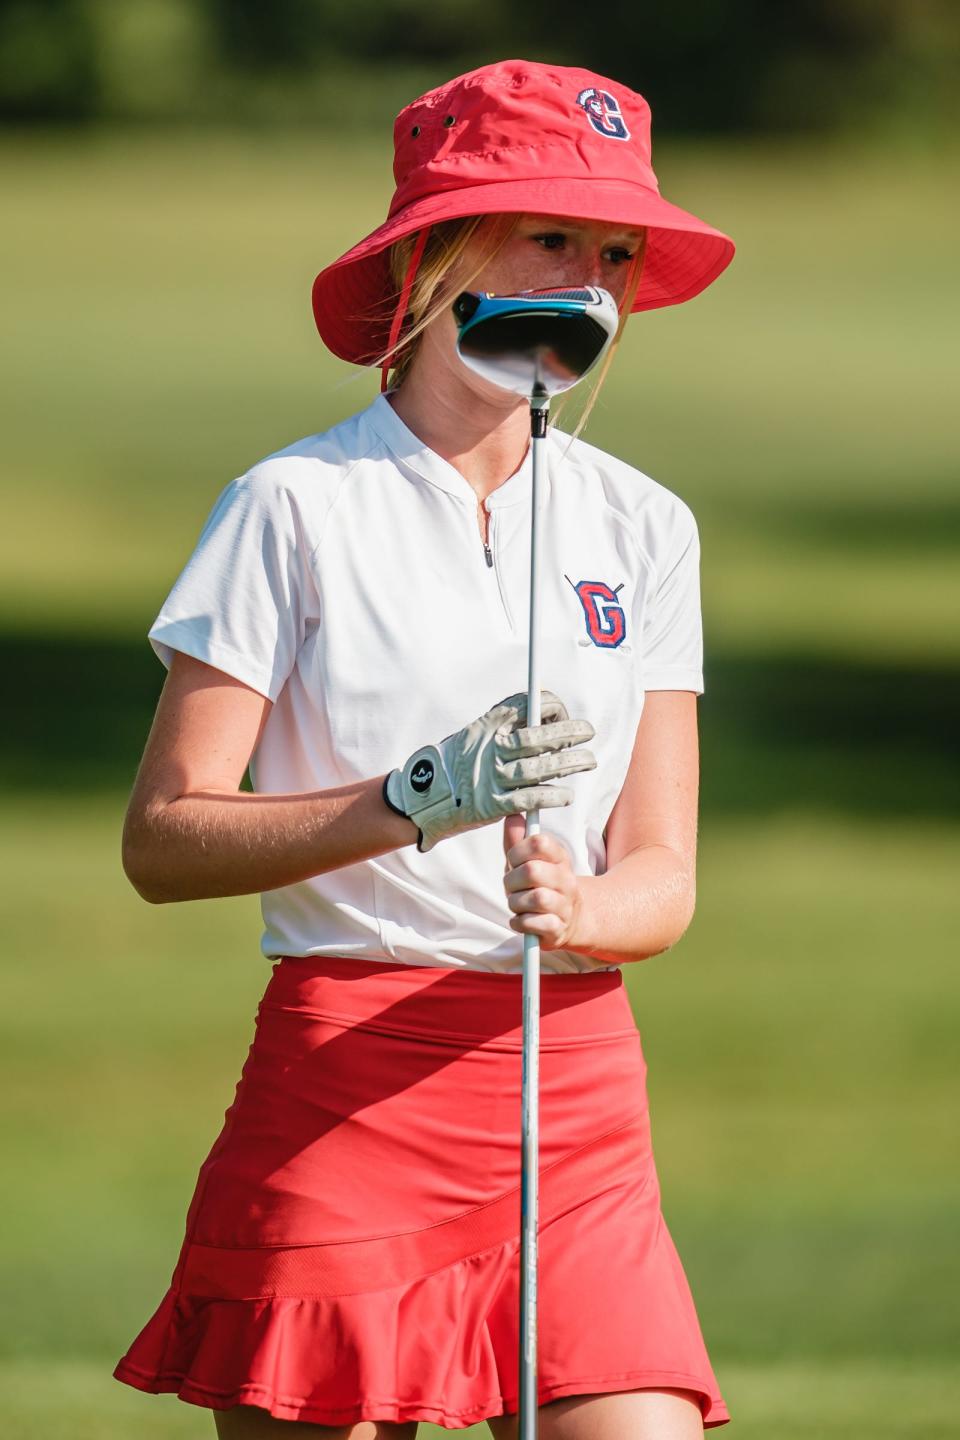 Hannah Steiner returns to her golf bag after a tee shot during the Inter-Valley Conference Girls Preseason Tournament last season at Wilkshire Golf Course in Bolivar. Steiner won the girls 16-18-year-old division of the First National Bank Junior Golf Tour regular season finale on Thursday.